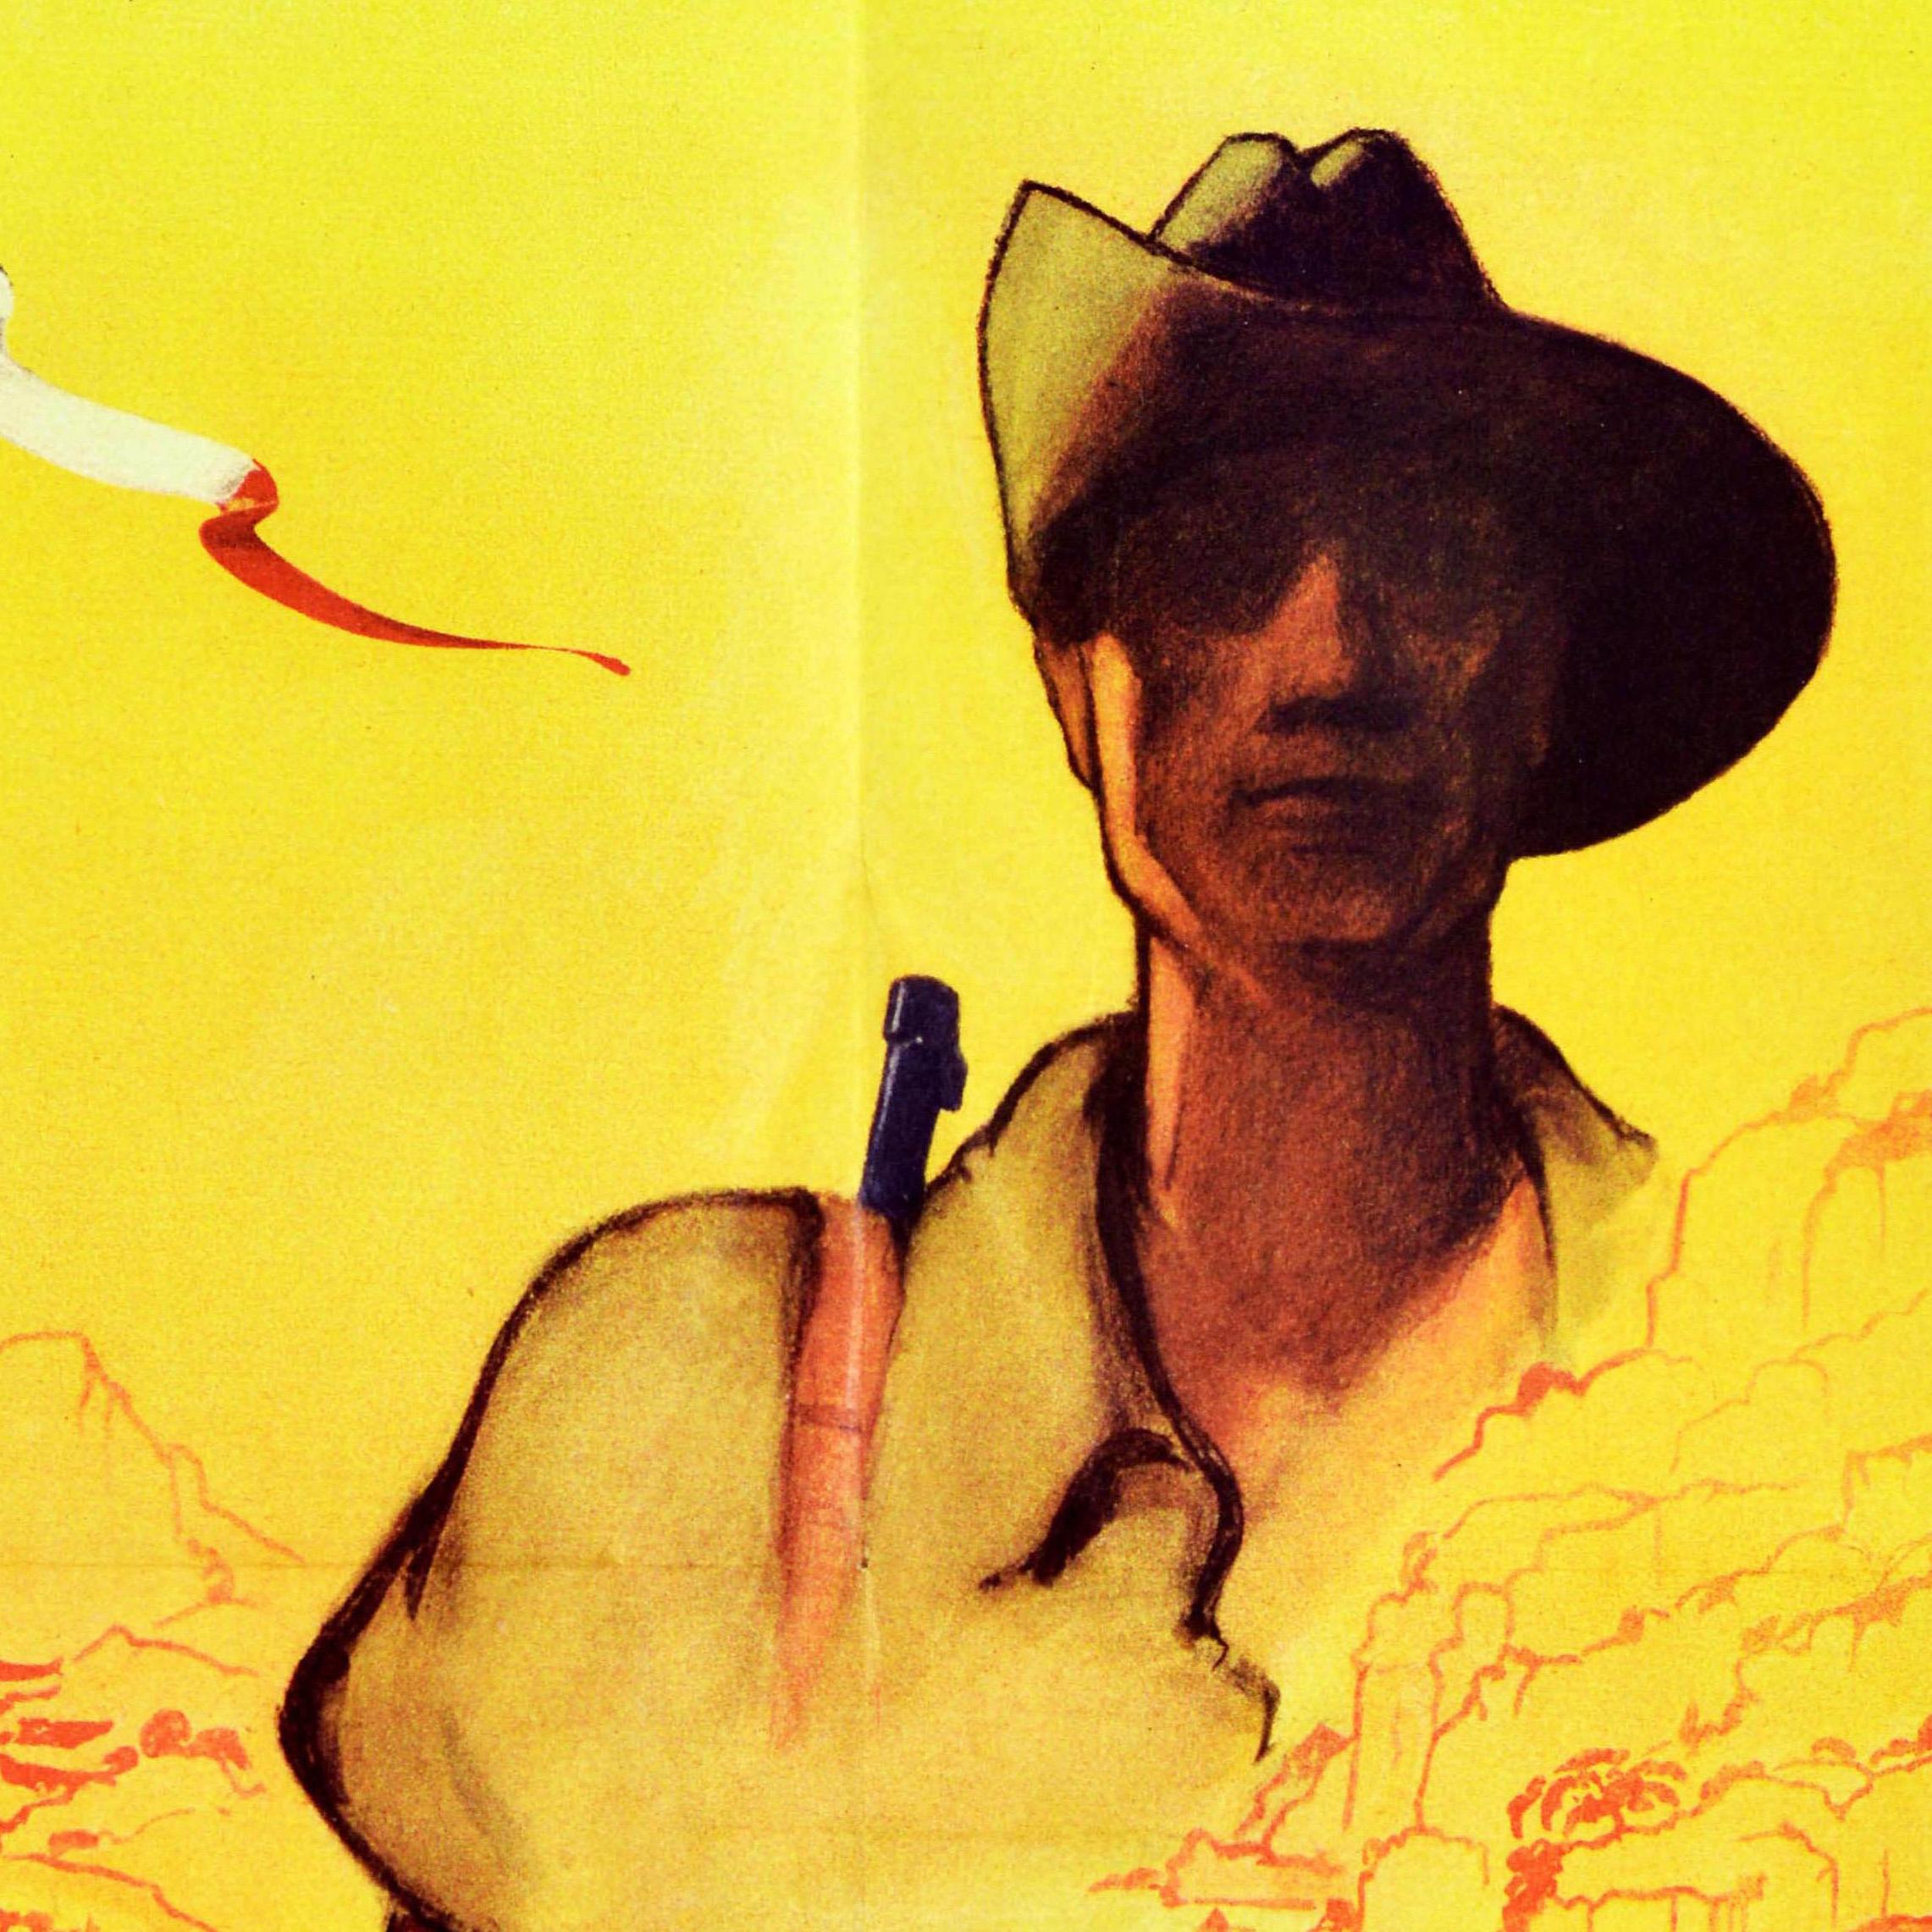 Original vintage poster - Aide Aux Combattants D'Indochine Aux Anciens, a leurs familles / Aid to Indochina combatants To the elderly, to their families - featuring a soldier armed with a rifle gun over his shoulder against a yellow background with